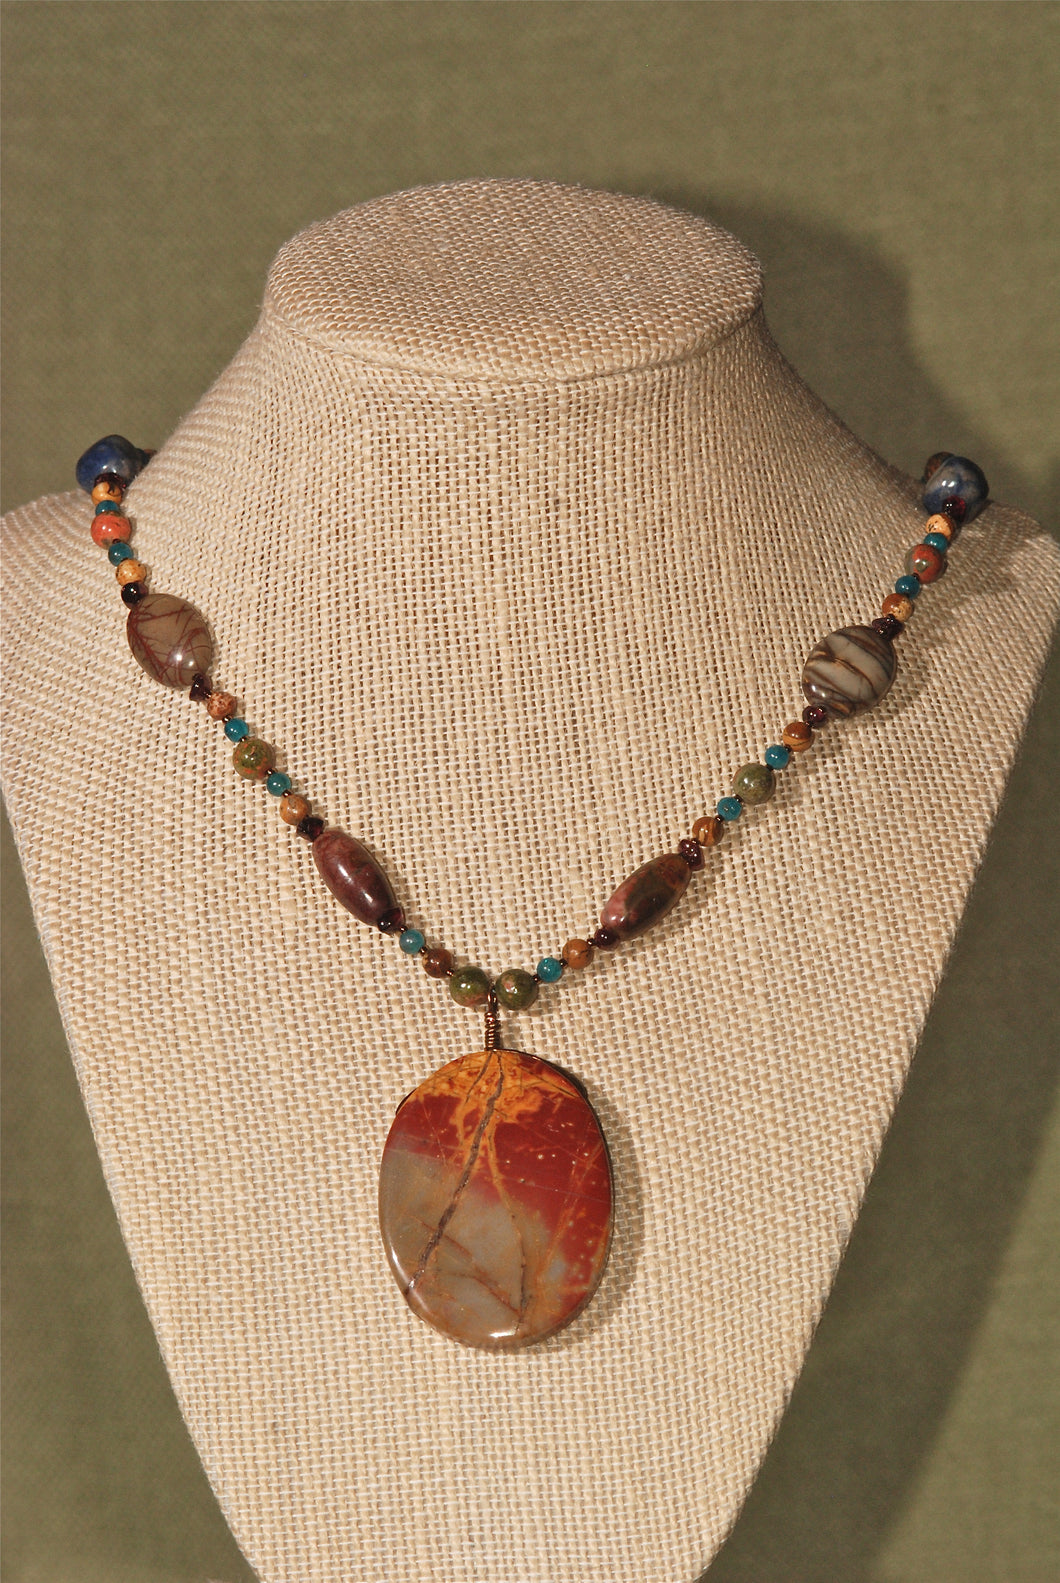 Energy Surround Necklace with Red Creek Jasper pendant - 3034ESN